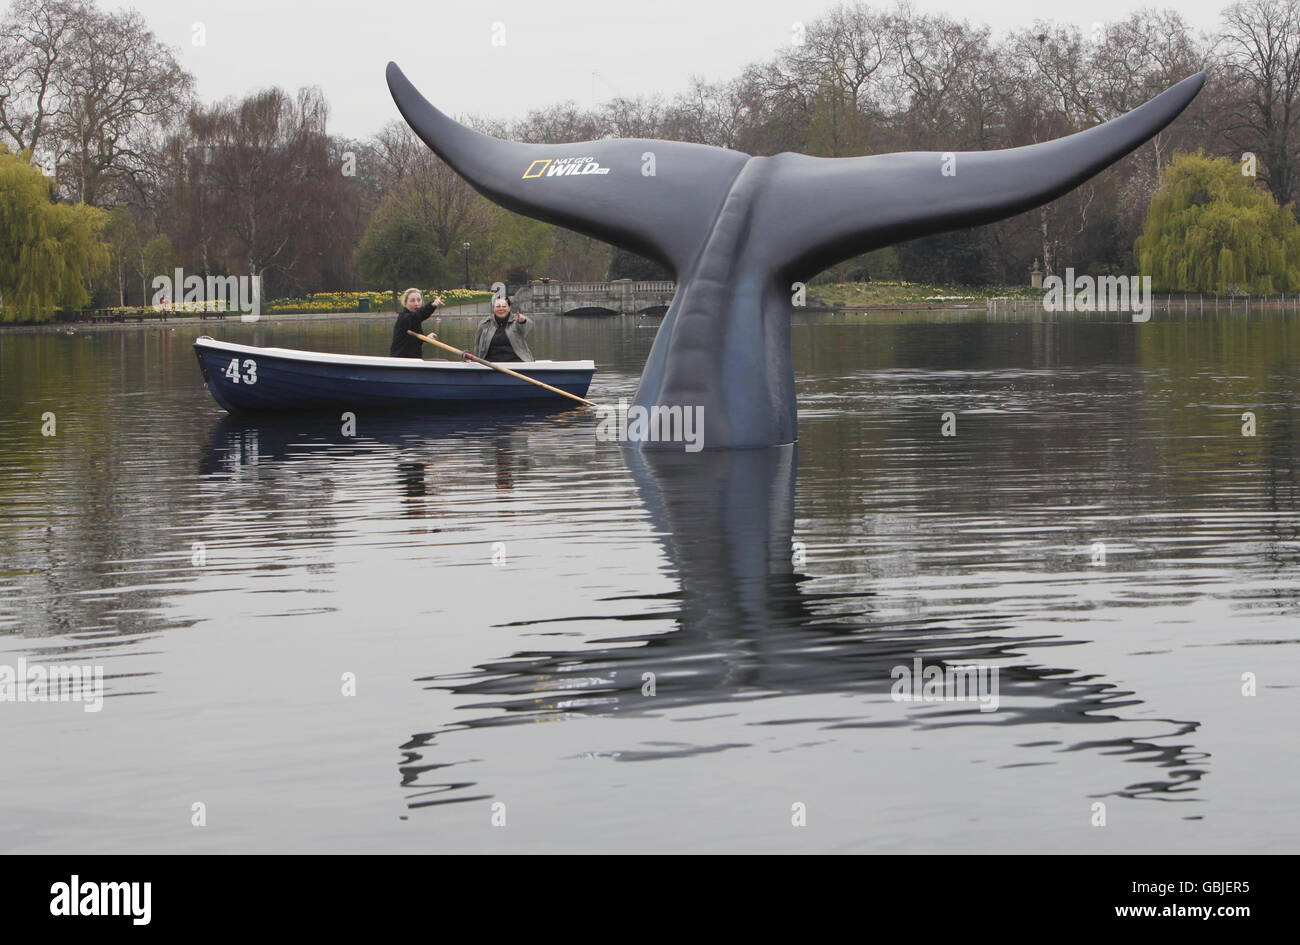 A 10 ft high, 20 ft wide life size model of a Blue Whale tail, commissioned by the National Geographic Channel, in the Serpentine in London's Hyde Park to celebrate the premiere of Blue Whale Odyssey and the launch of its new channel, Nat Geo Wild HD. Stock Photo